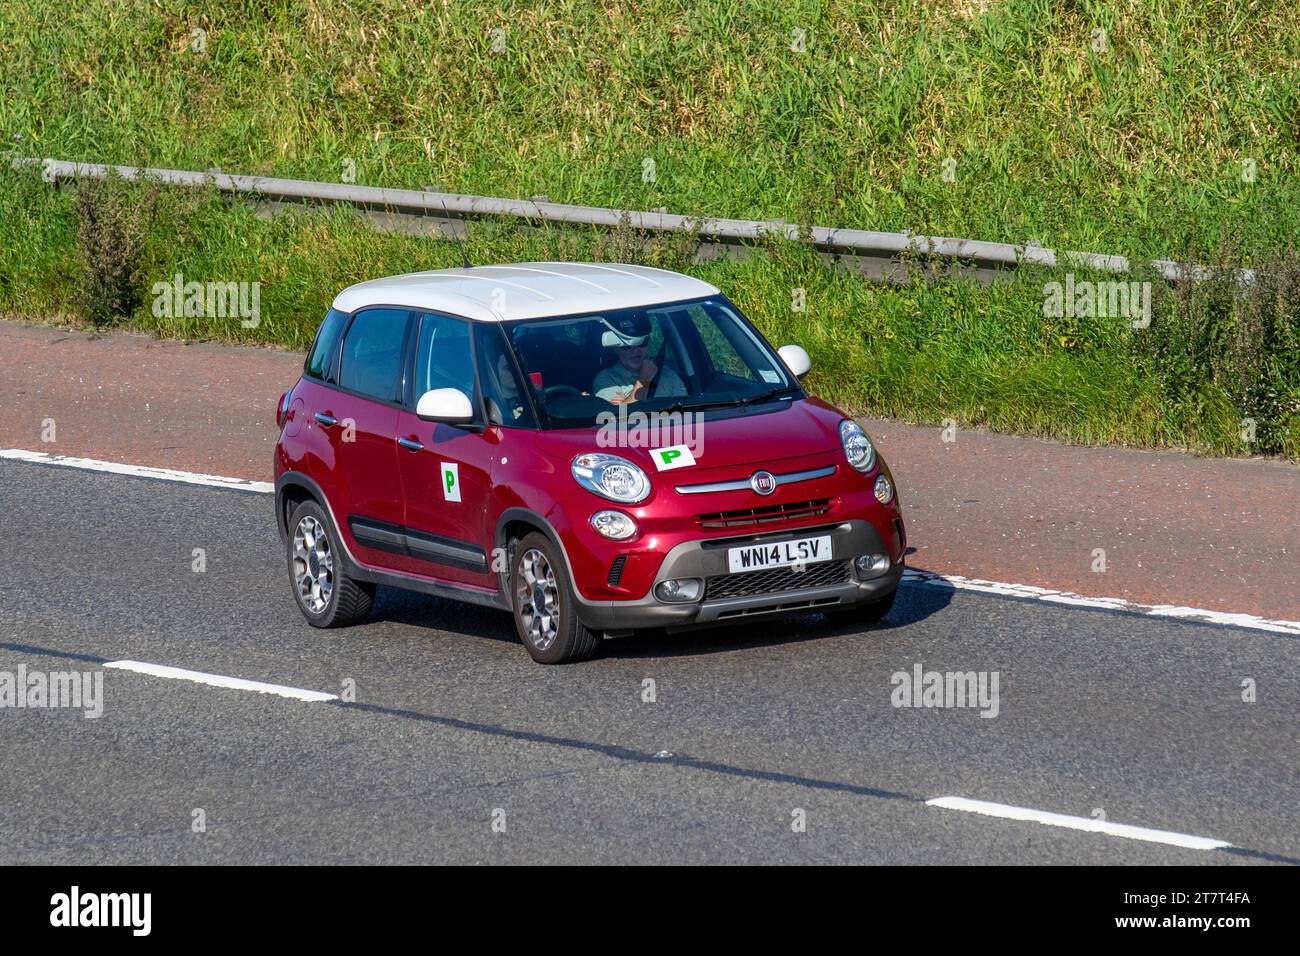 2014 Fiat 500L Trekking Multijet 105 Start/Stop Red Car Hatchback Diesel 1598 cc with Green P provisional L plates driving on the M6 motorway, UK Stock Photo